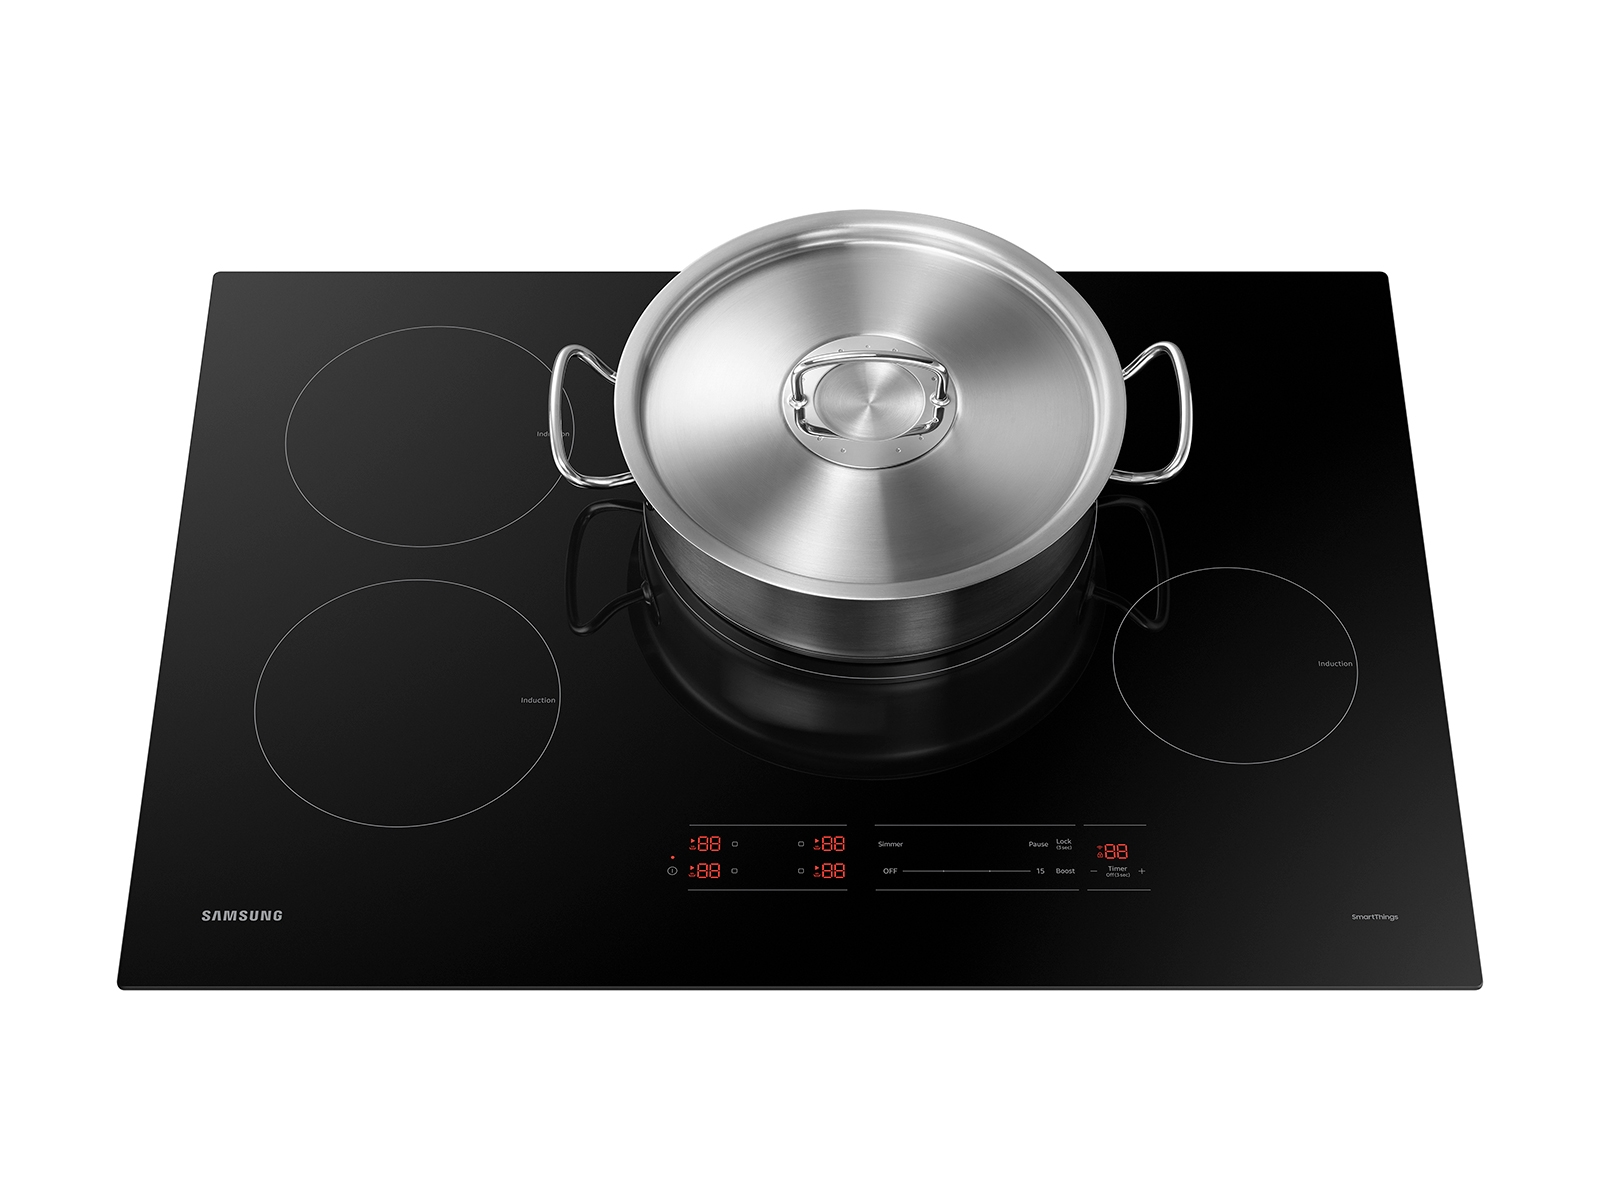 No longer cooking with gas: Induction cooktop mini guide - Renew